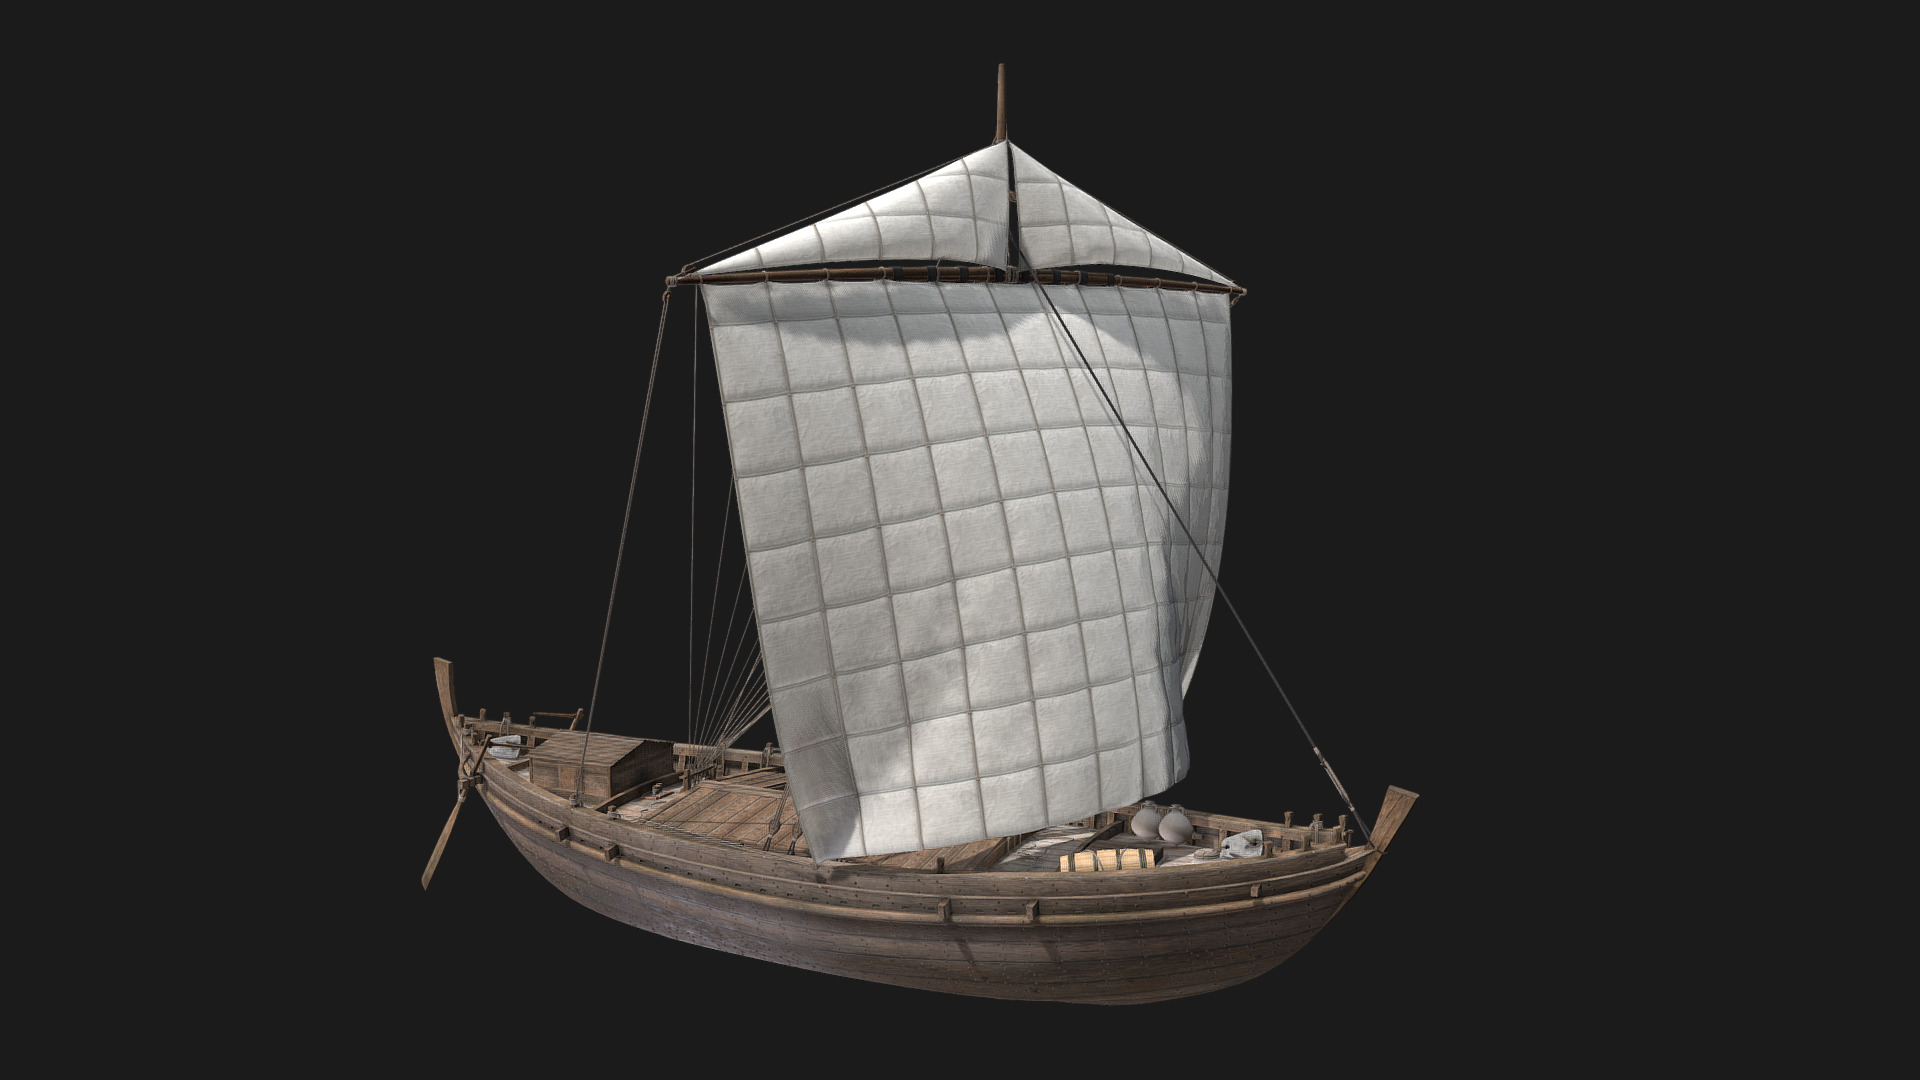 During the construction of a new riverside wall in 1962 in London, the remains of an interesting ship were found. Dating evidence from the timbers and a coin found in the mast step placed the ship as likely being built, and sunk, during the Roman period, specifically in the 2nd Century CE. However, the ship was constructed in the Celtic tradition.

The reconstruction is based primarily on the excavation report by Peter Marsden published by English Heritage, “Ships of the Port of London – First to eleventh Centuries AD”. It contained detailed drawings of the remains and reconstruction drawings. Where no evidence remained, such as for the sails and the rear of the ship, Roman period iconography and other Roman period shipwrecks from northern Europe were used as inspiration. The sail plan is based of the Torlonia relief, and the nearly intact mast of a Roman period ship found in Bruges, Belgium. The deckhouse for the cabin is based off the well preserved cabin of the De Meern 1 shipwreck in the Netherlands 3d model